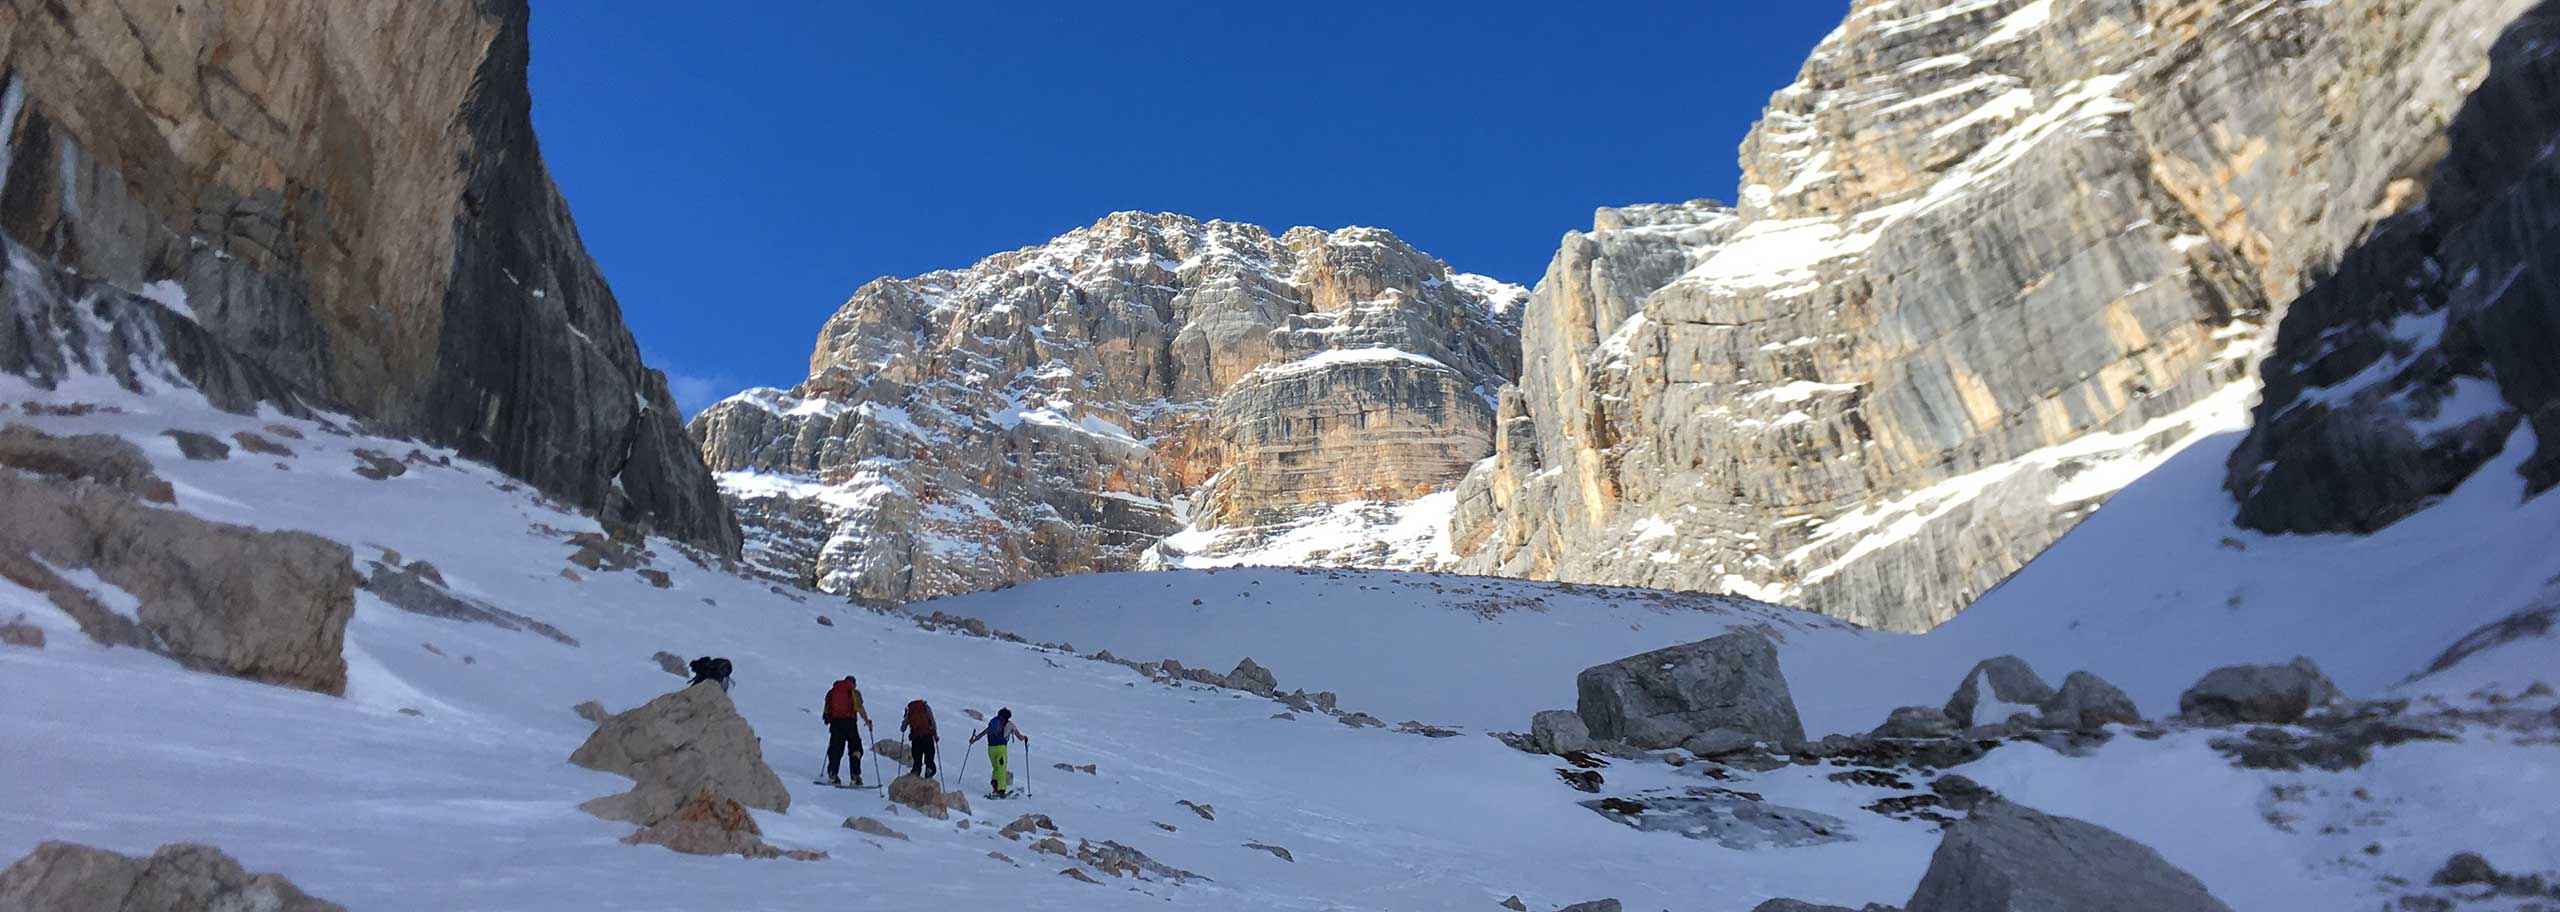 Ski Mountaineering in Alta Badia, Guided Trips and Courses